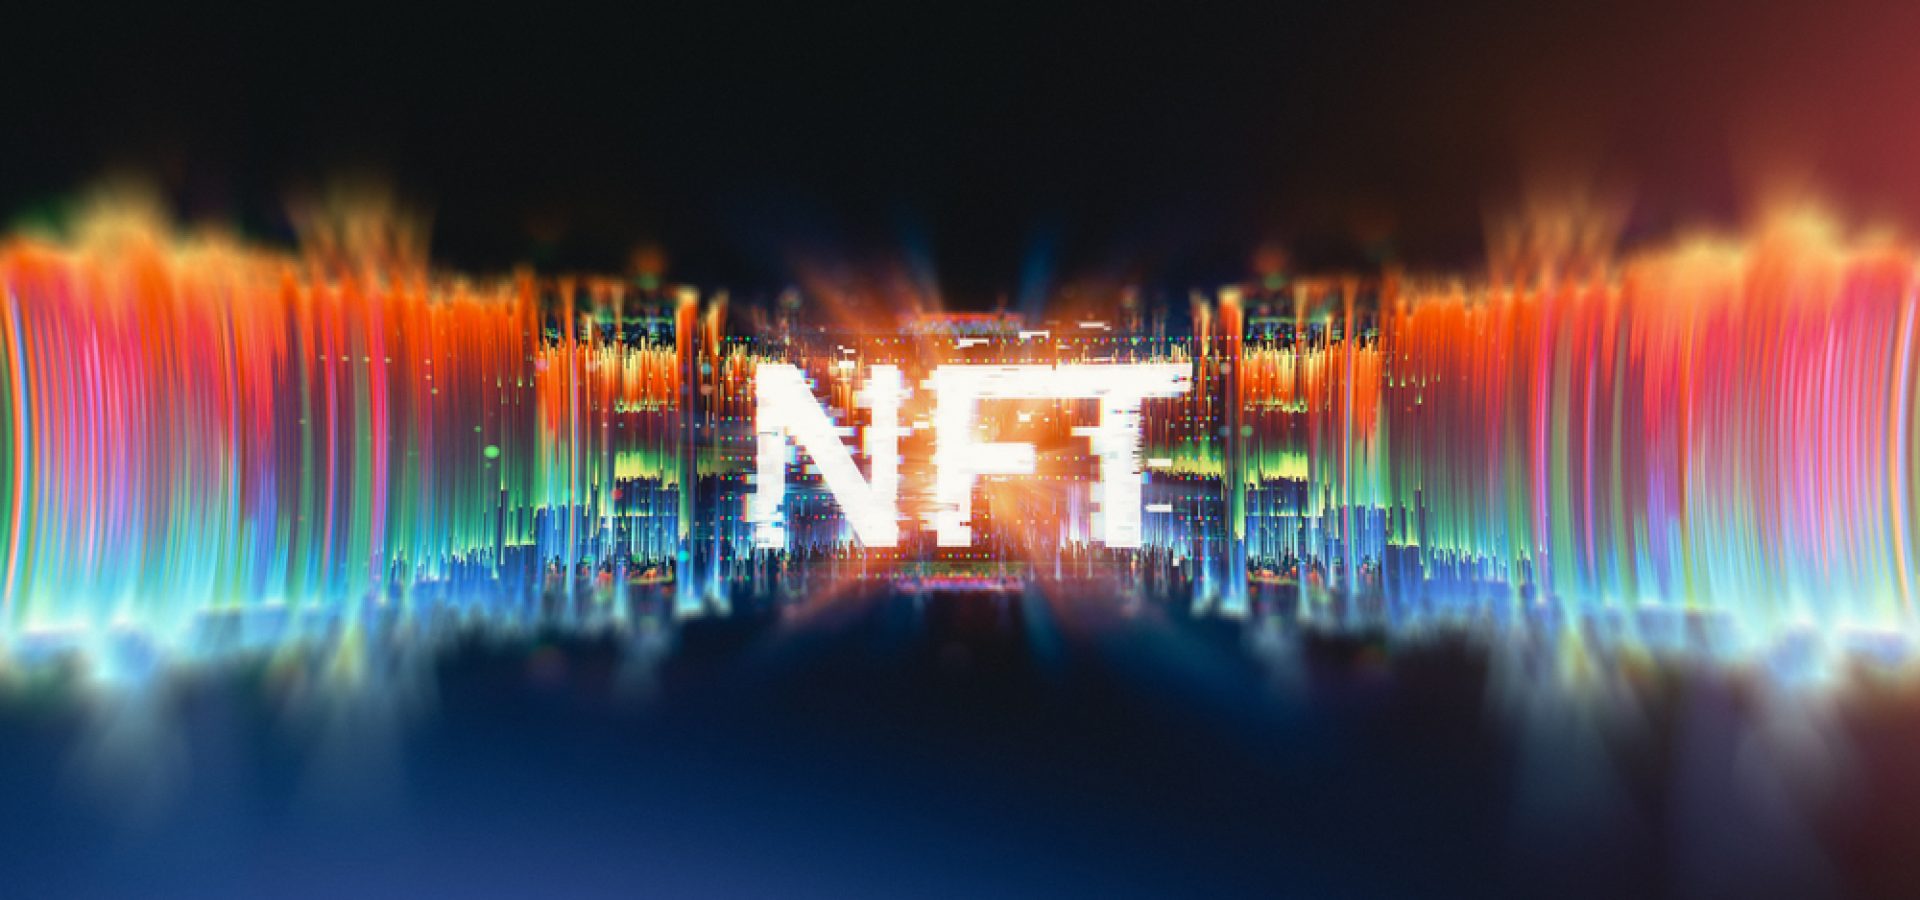 Best Marketplaces for Buying Non-Fungible Tokens (NFTs)